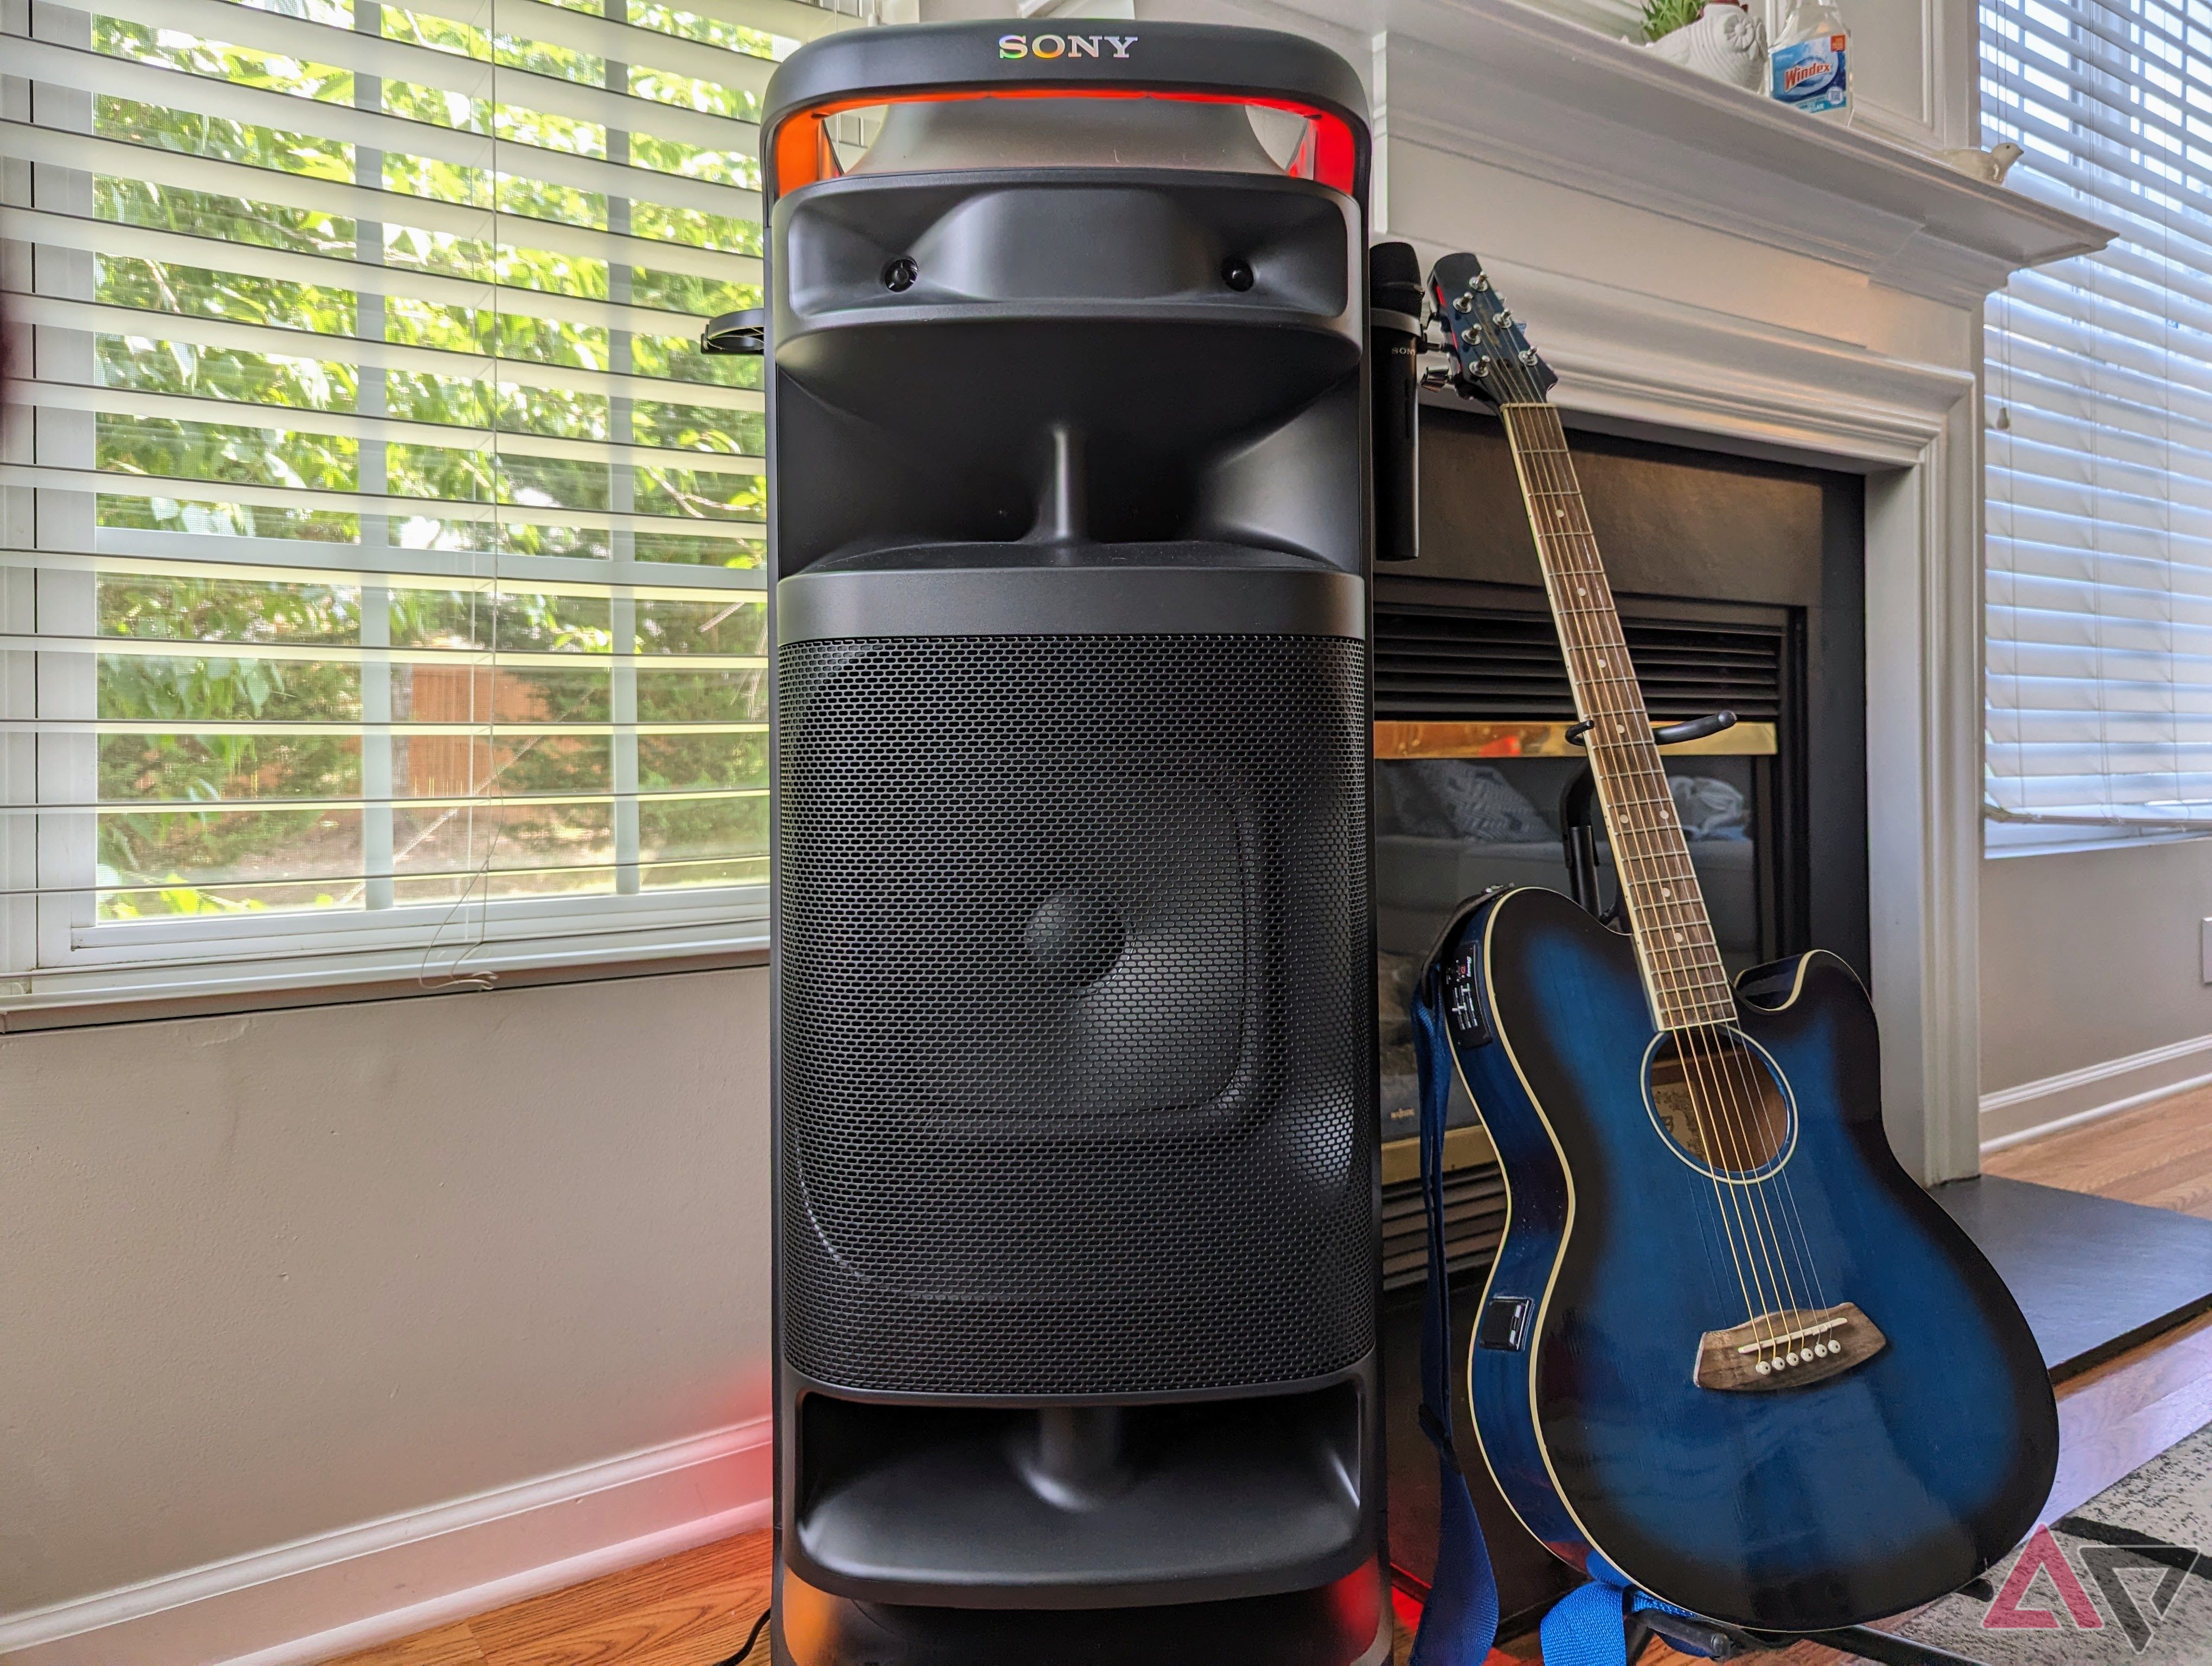 Sony Ult Power 10 tower speaker next to a blue acoustic guitar